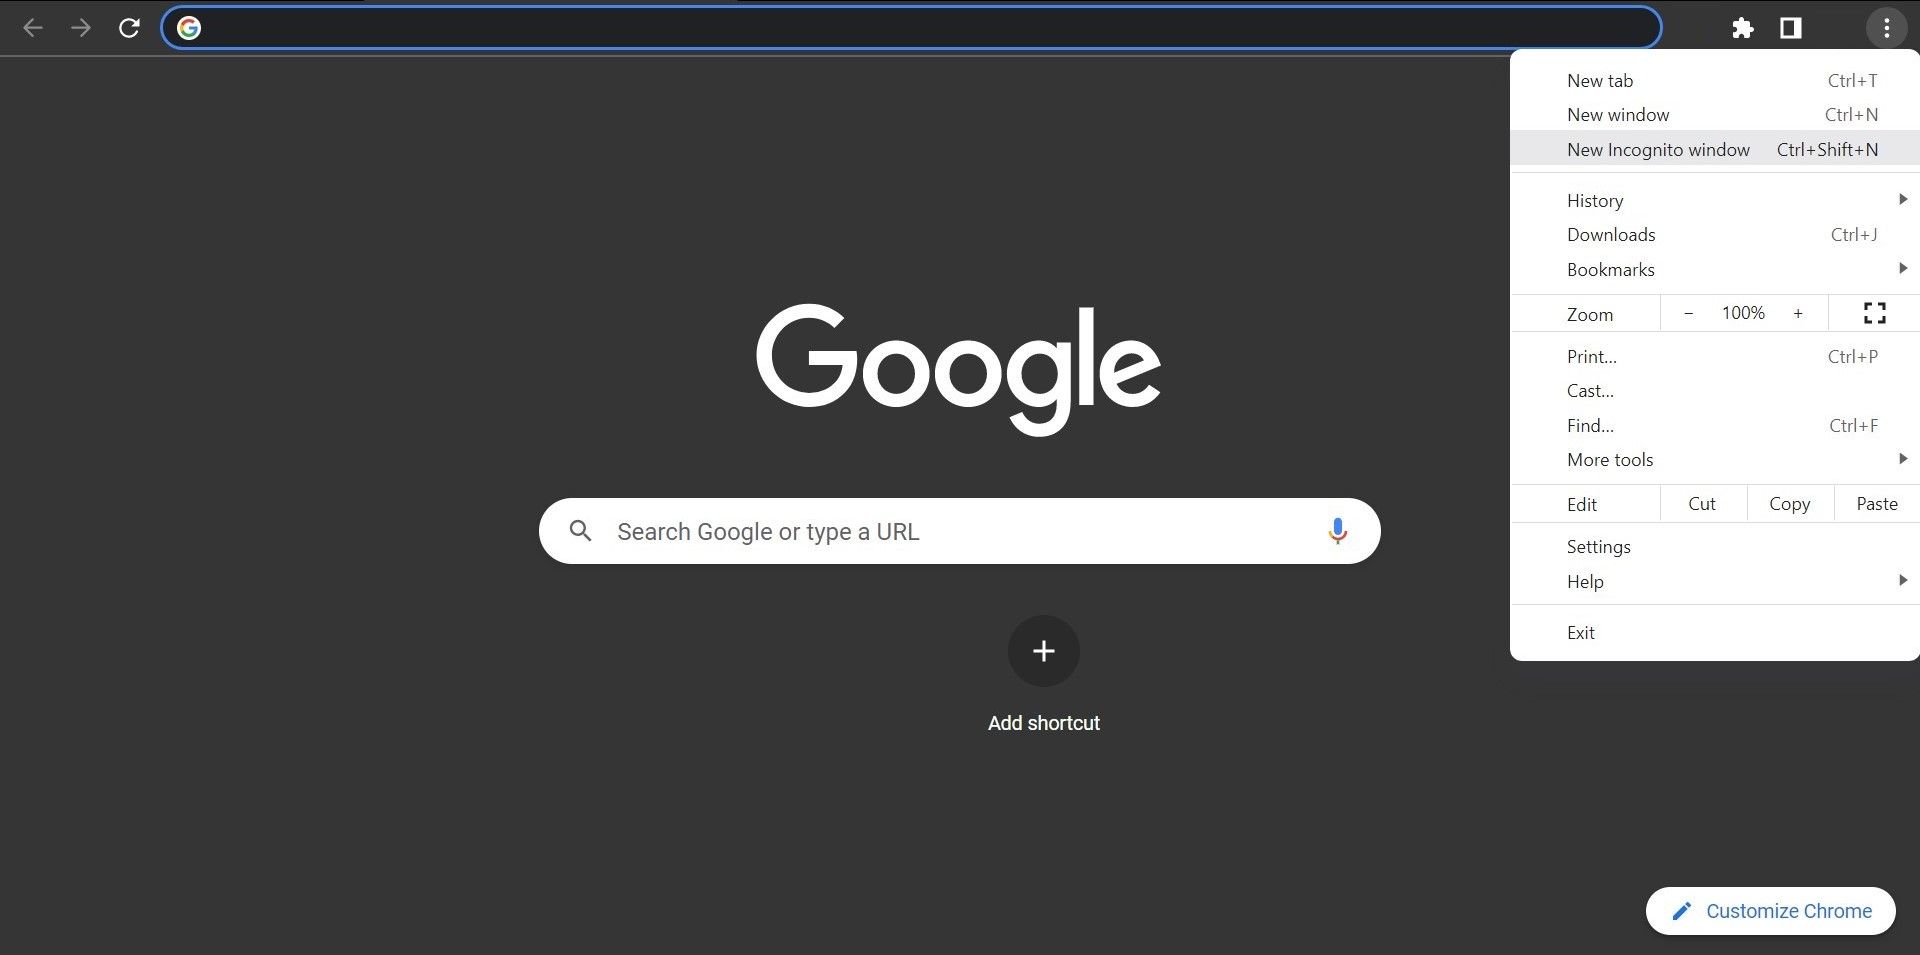 Open a new incognito window by clicking three vertical dots in the top right corner of Chrome